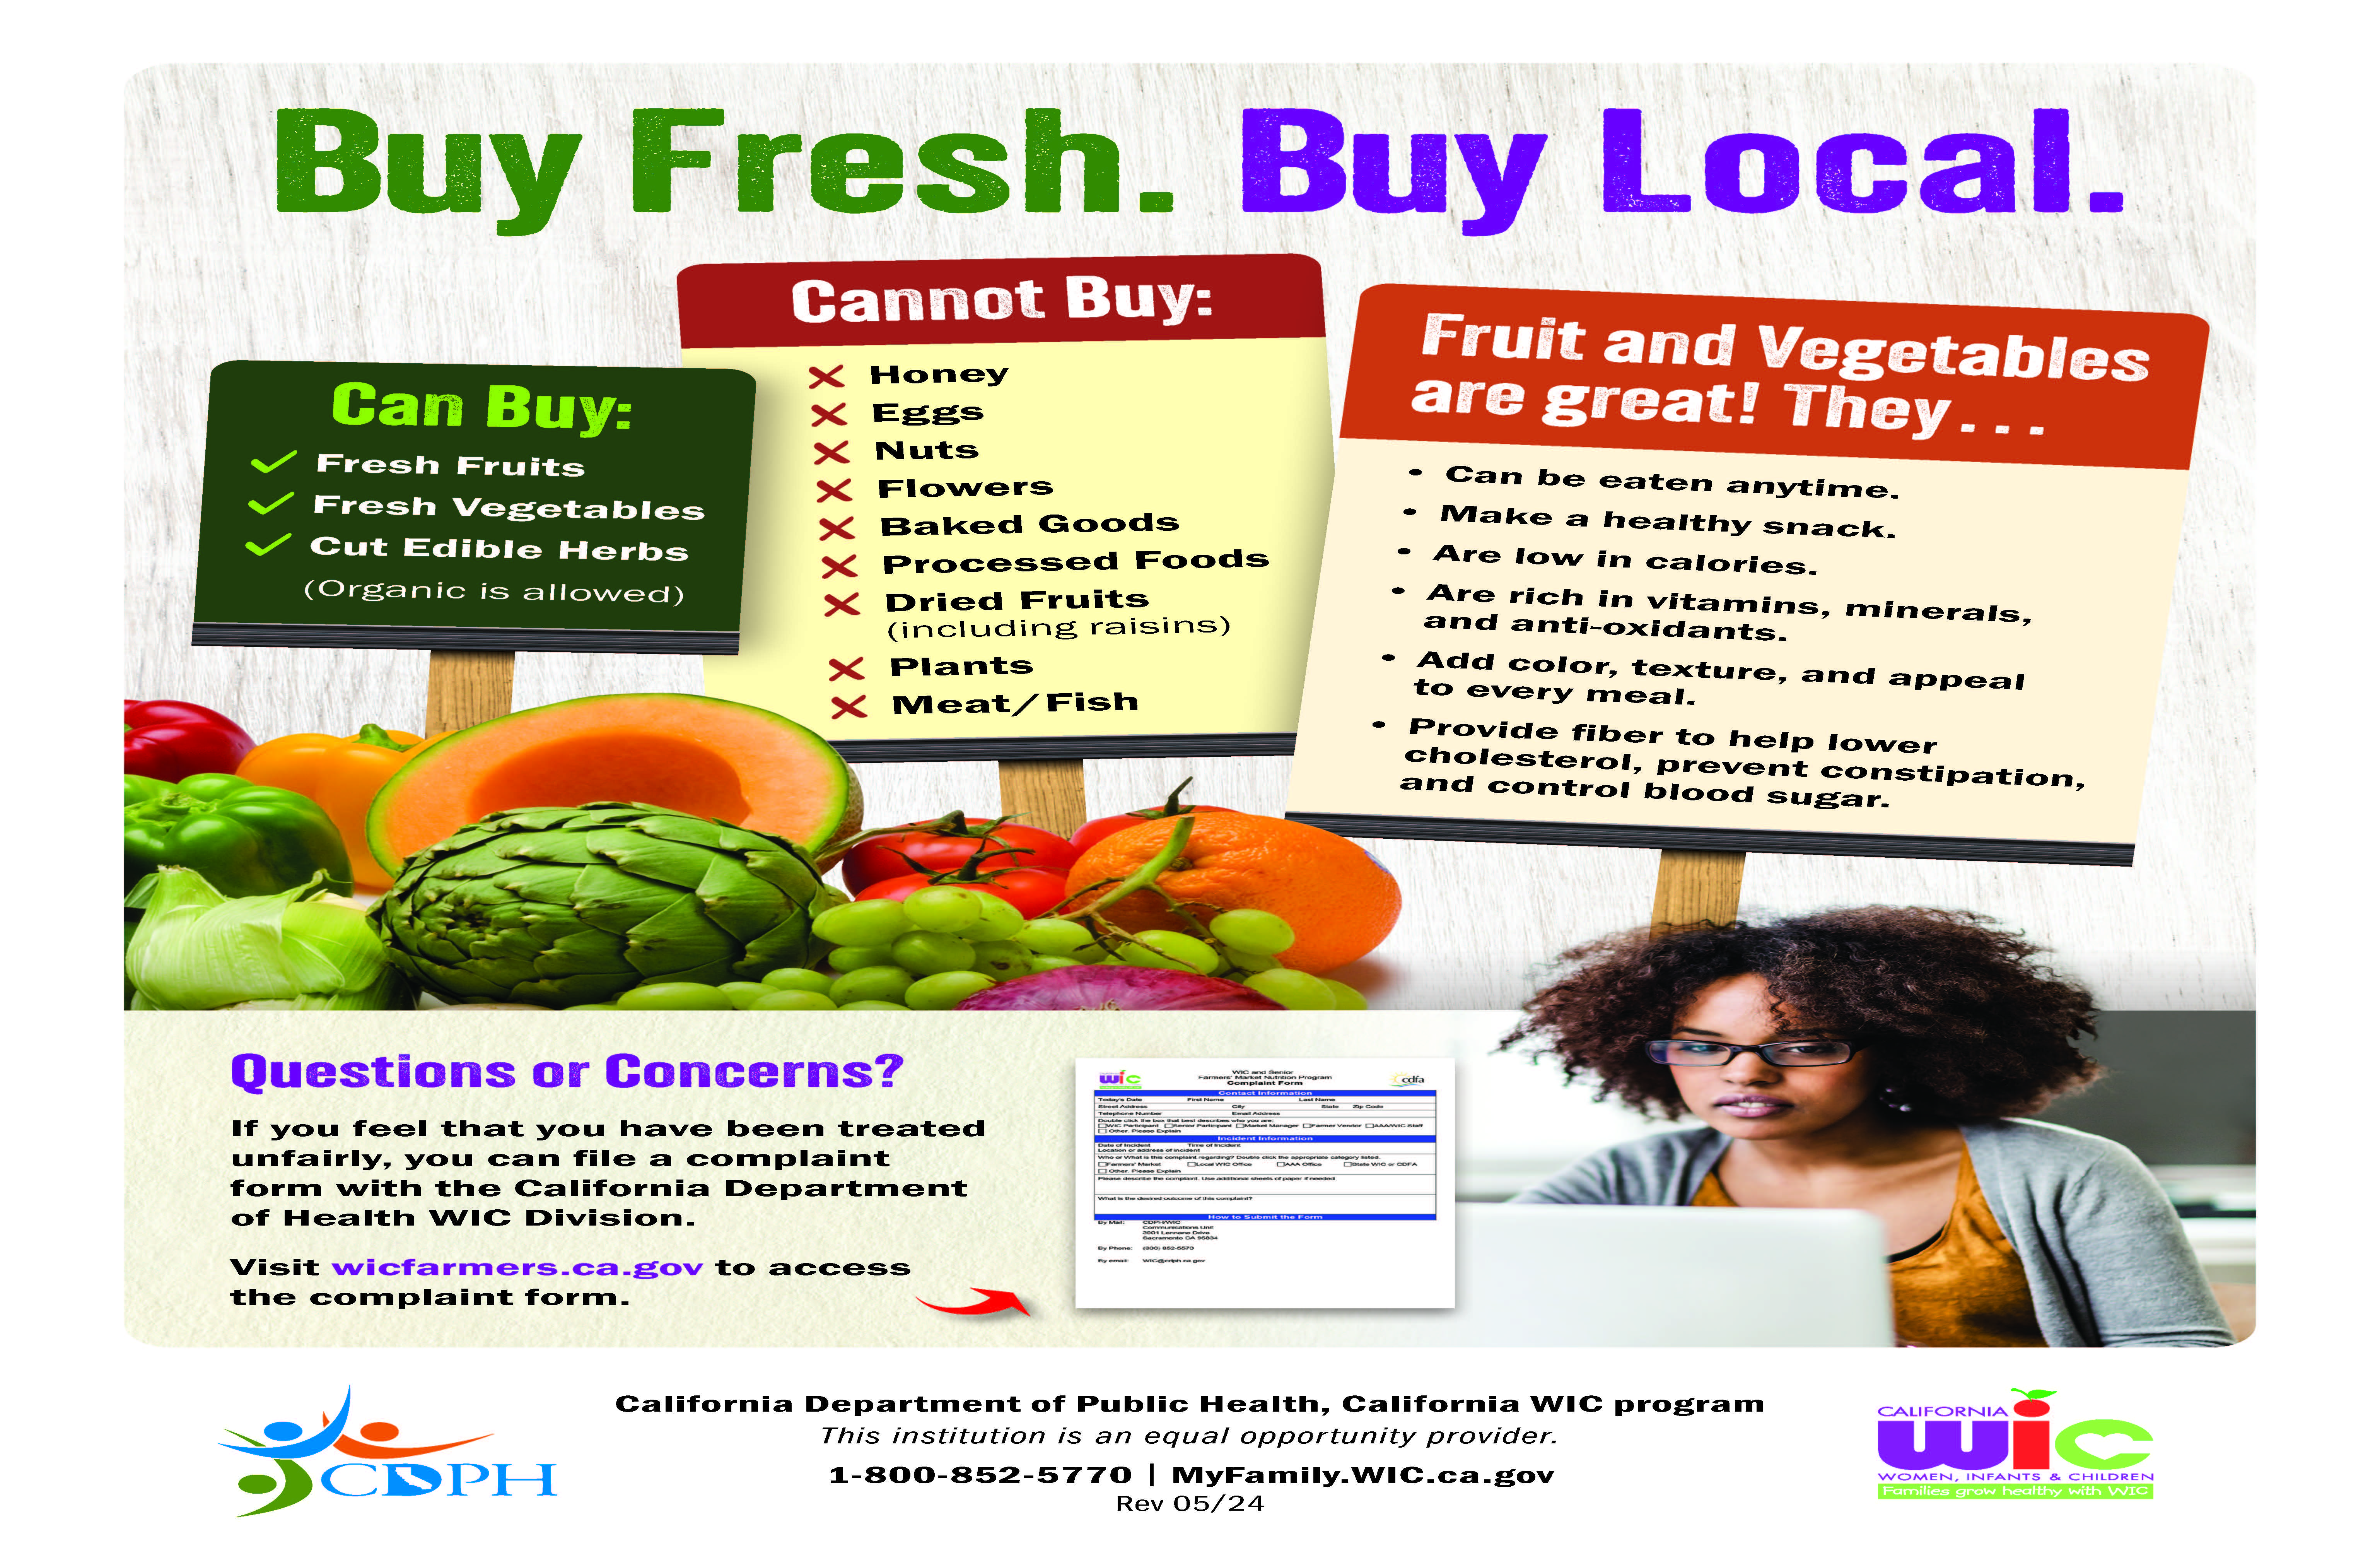 Assorted fruits and vegetables and a woman on a computer. Text promotes buying fresh and local produce